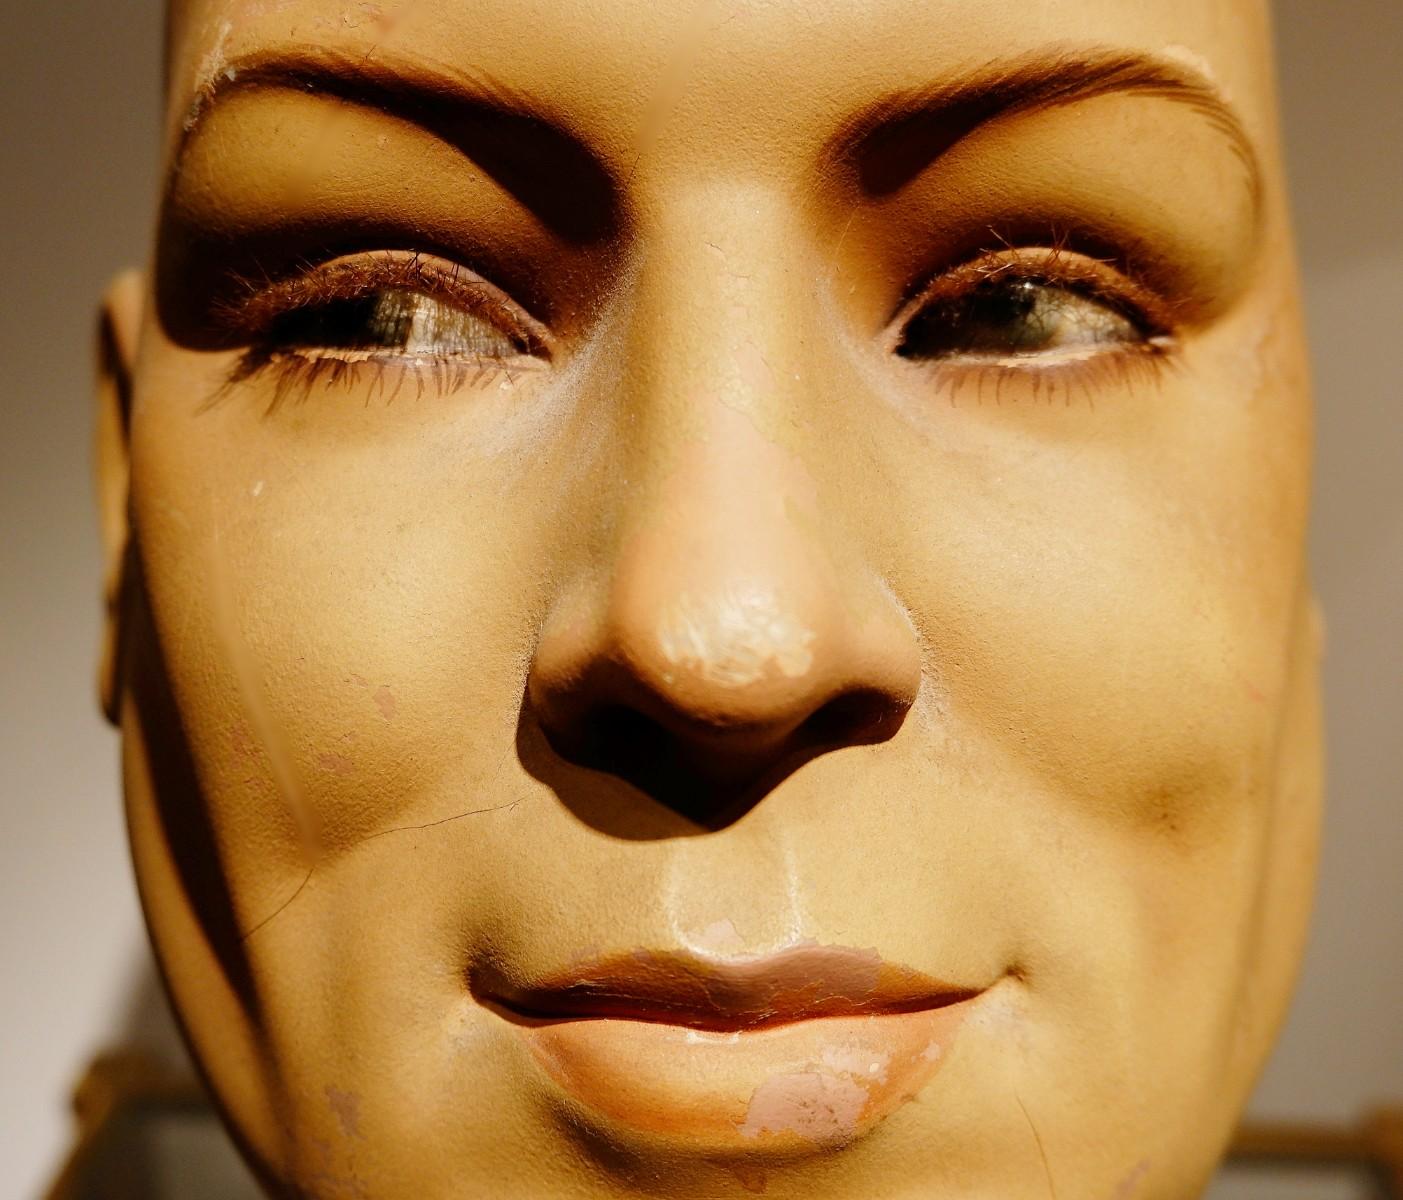 Male mannequin head or millinery, store display.